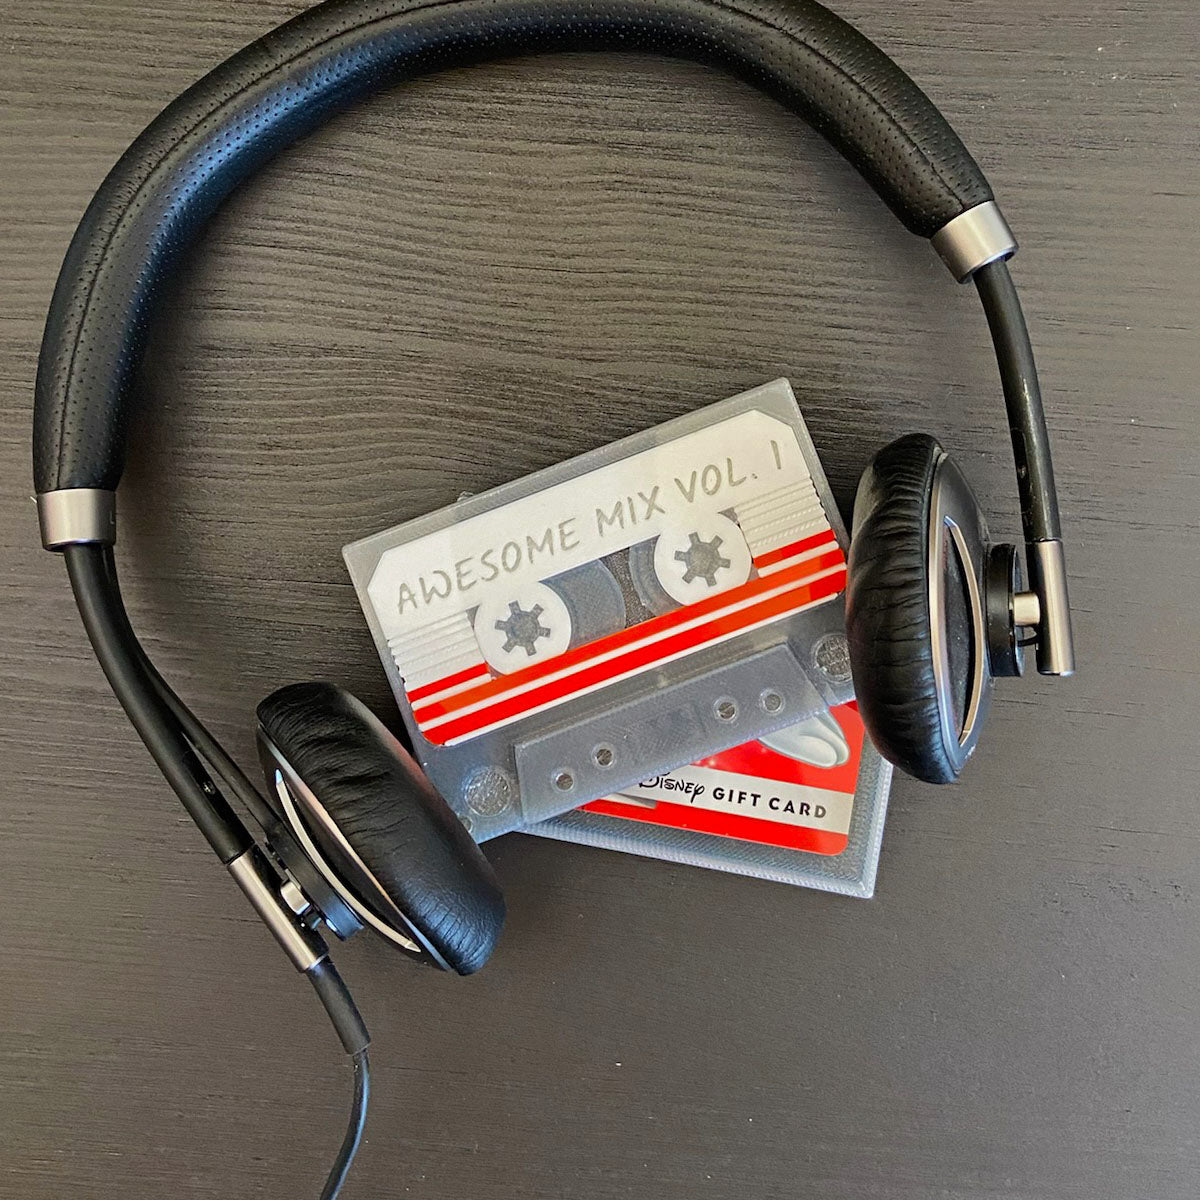 Awesome Mix Tape Gift Card Holder